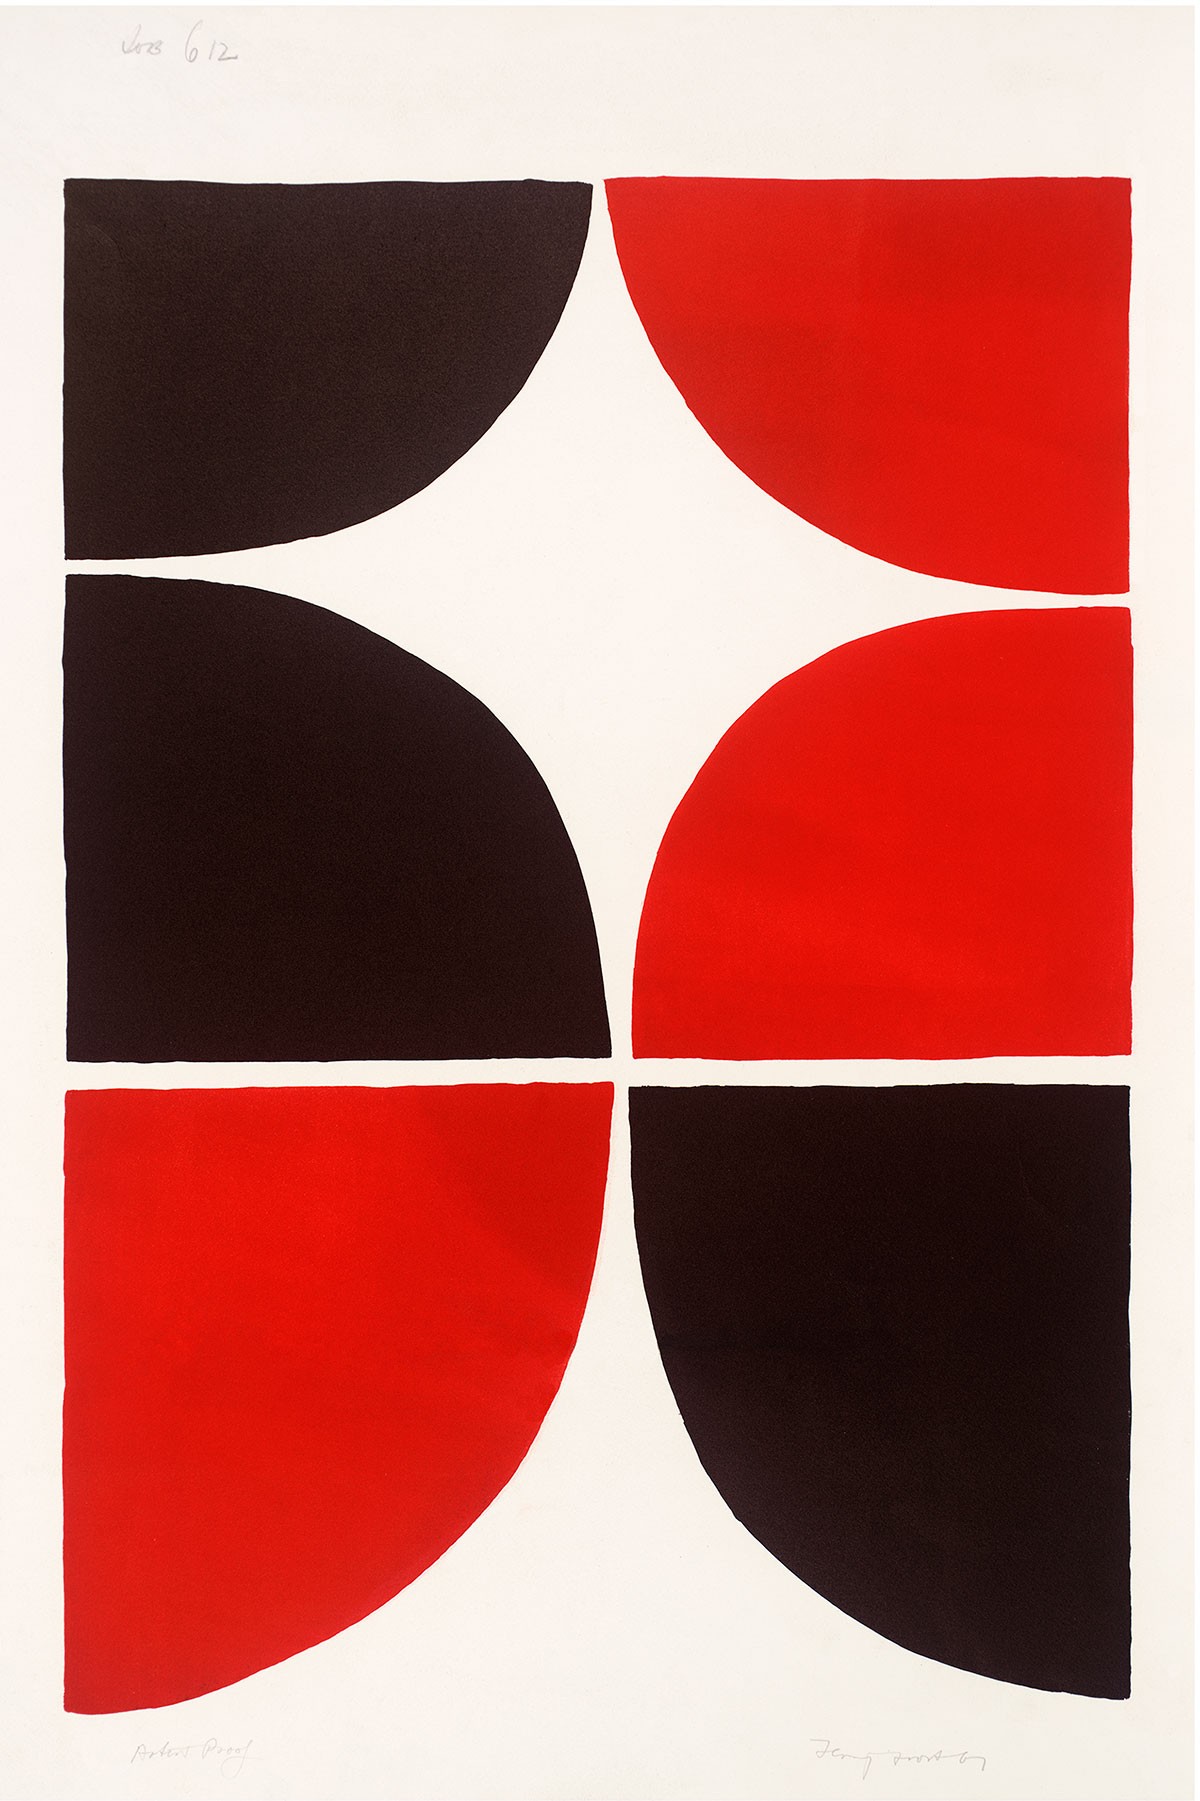  'Red and Black Solid' (1967-8) by Terry Frost (Print)